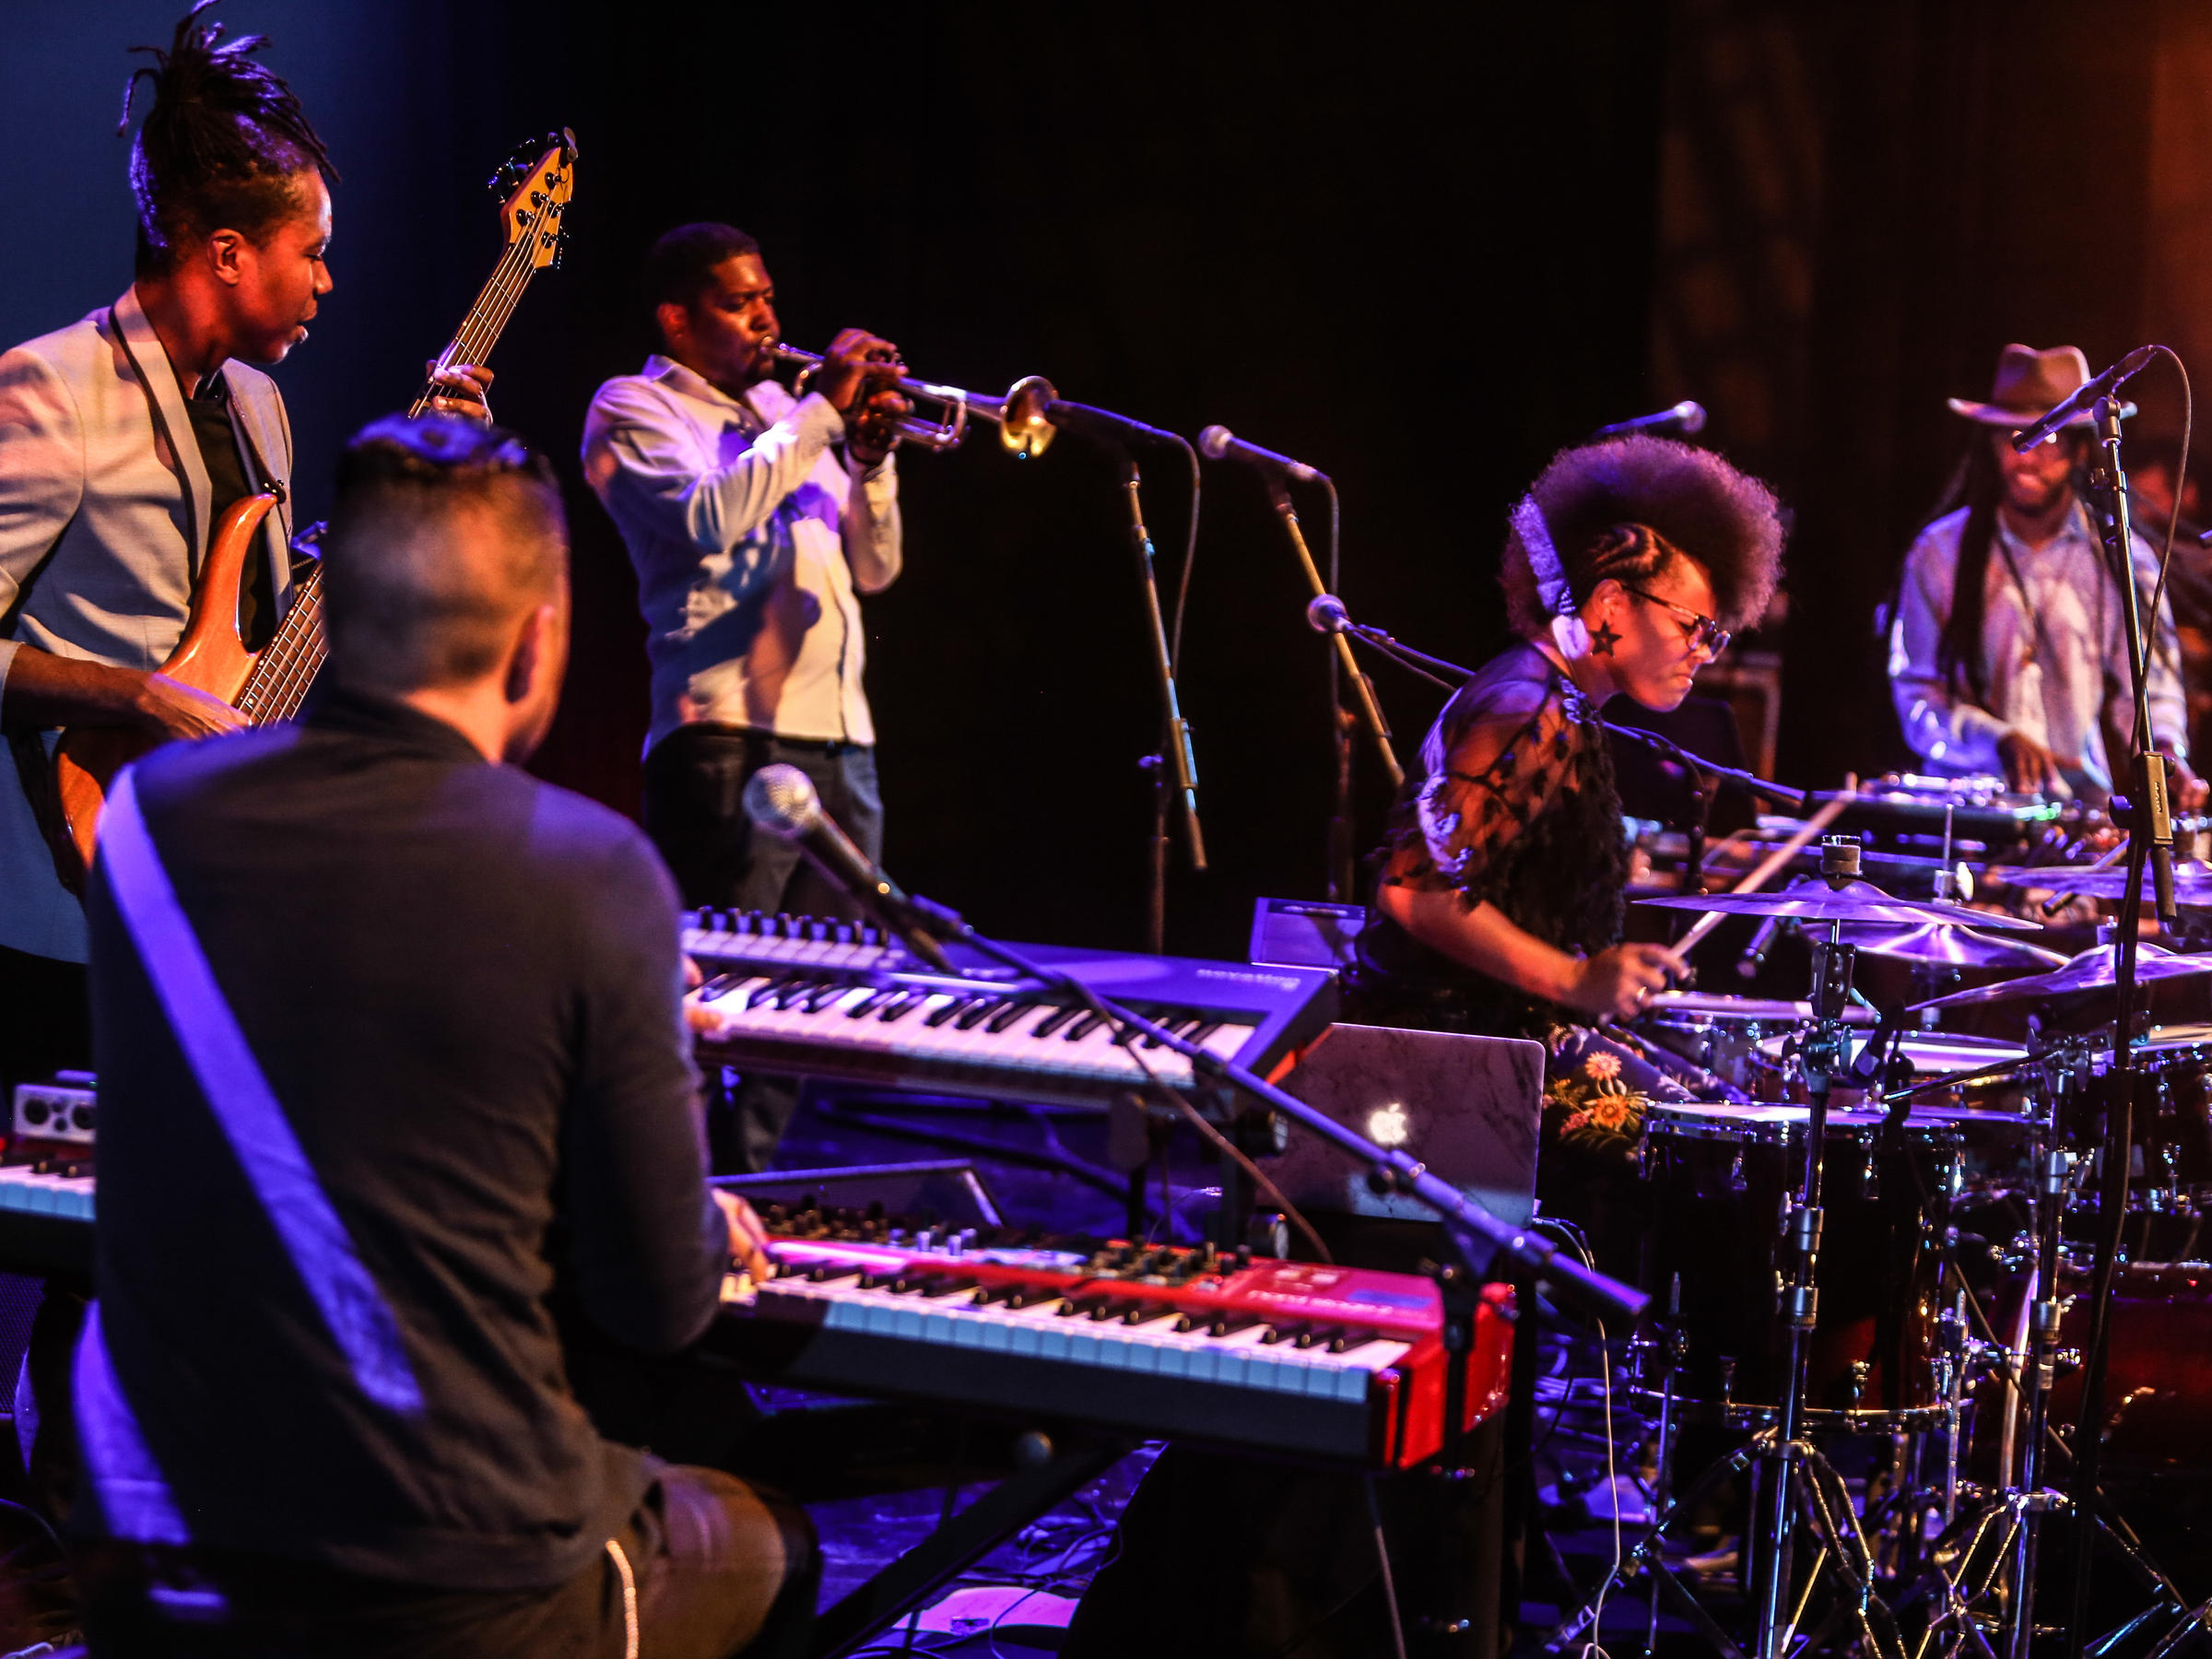 Yissy Garcia y Bandancha perform at the Kennedy Center on May 9, 2018 as part of the Artes de Cuba Festival.